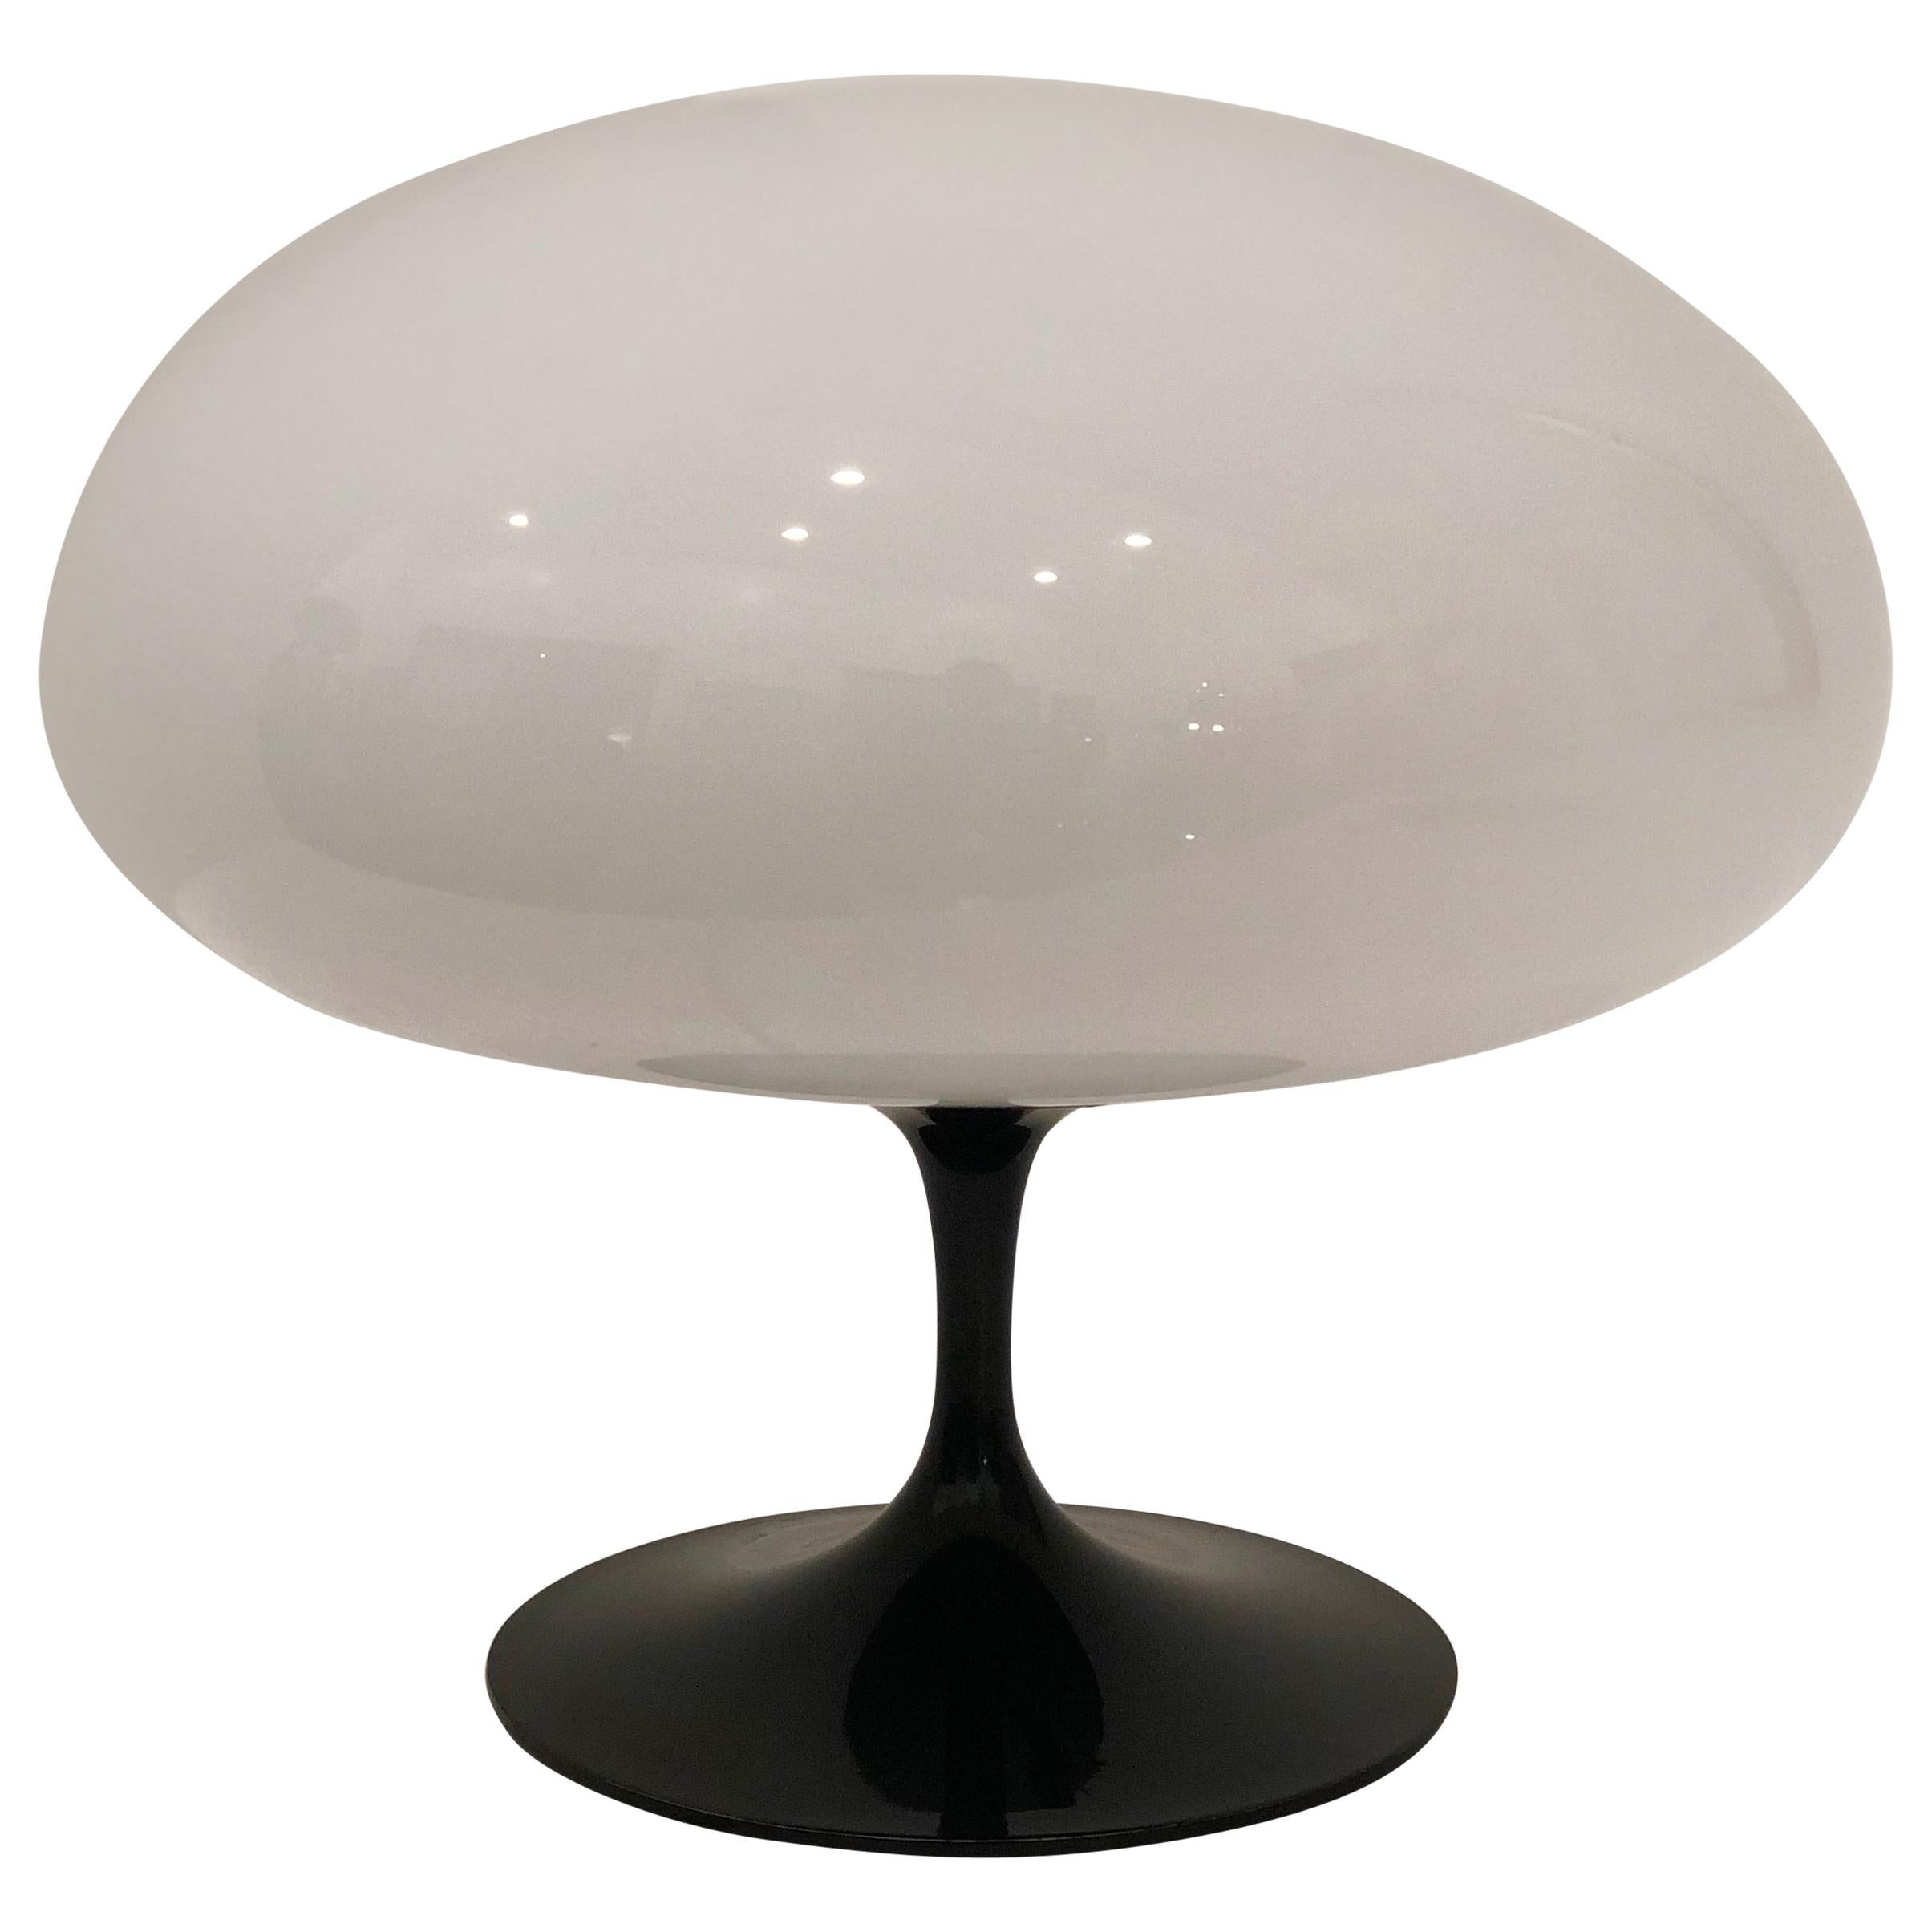 Midcentury Stemlite Tulip Lamp by Bill Curry for Design Line